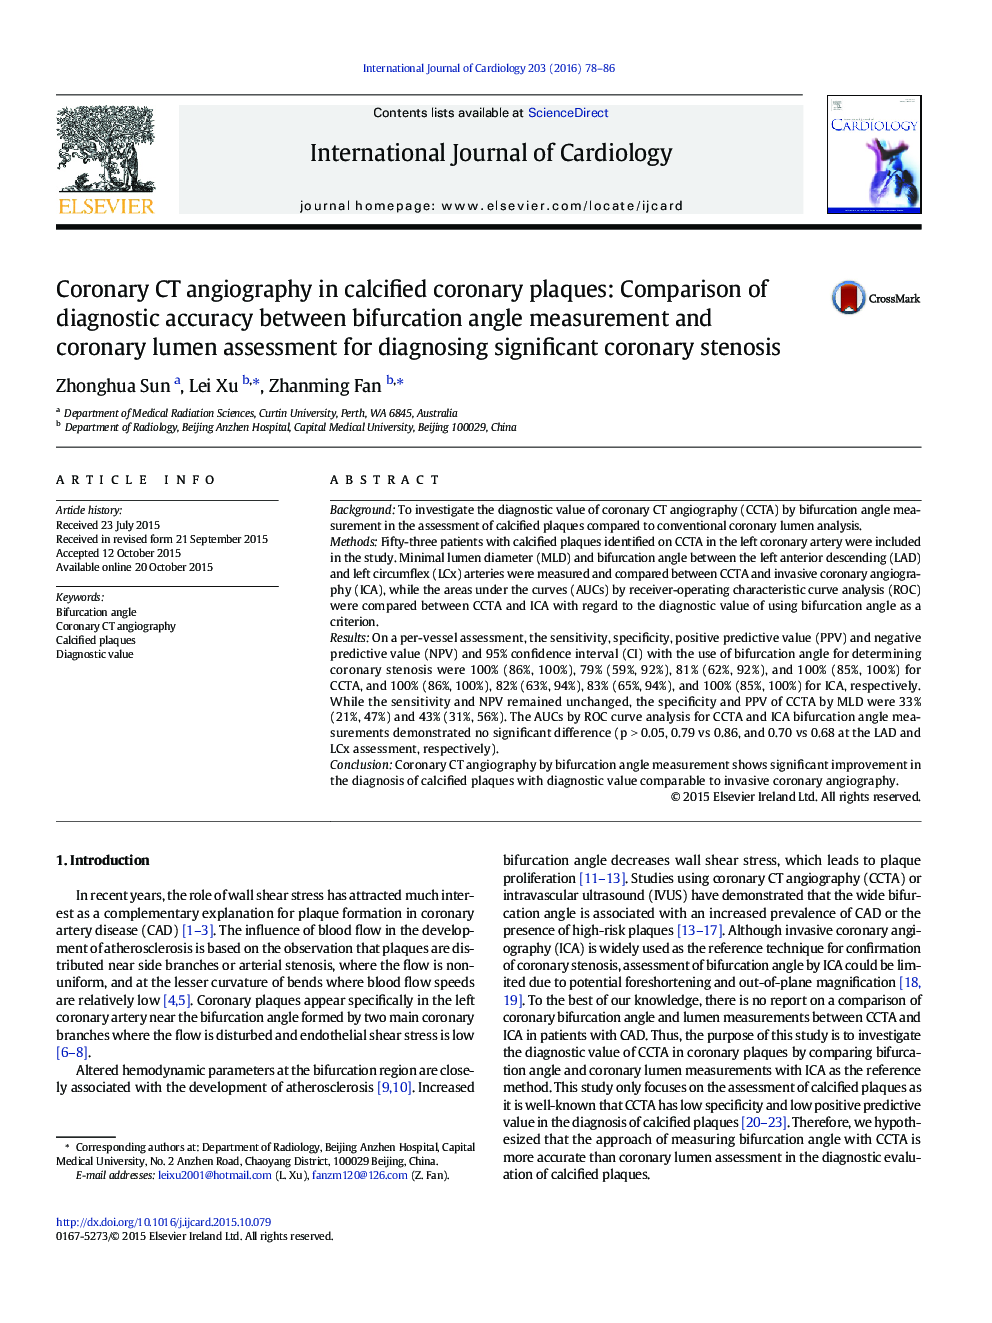 Coronary CT angiography in calcified coronary plaques: Comparison of diagnostic accuracy between bifurcation angle measurement and coronary lumen assessment for diagnosing significant coronary stenosis